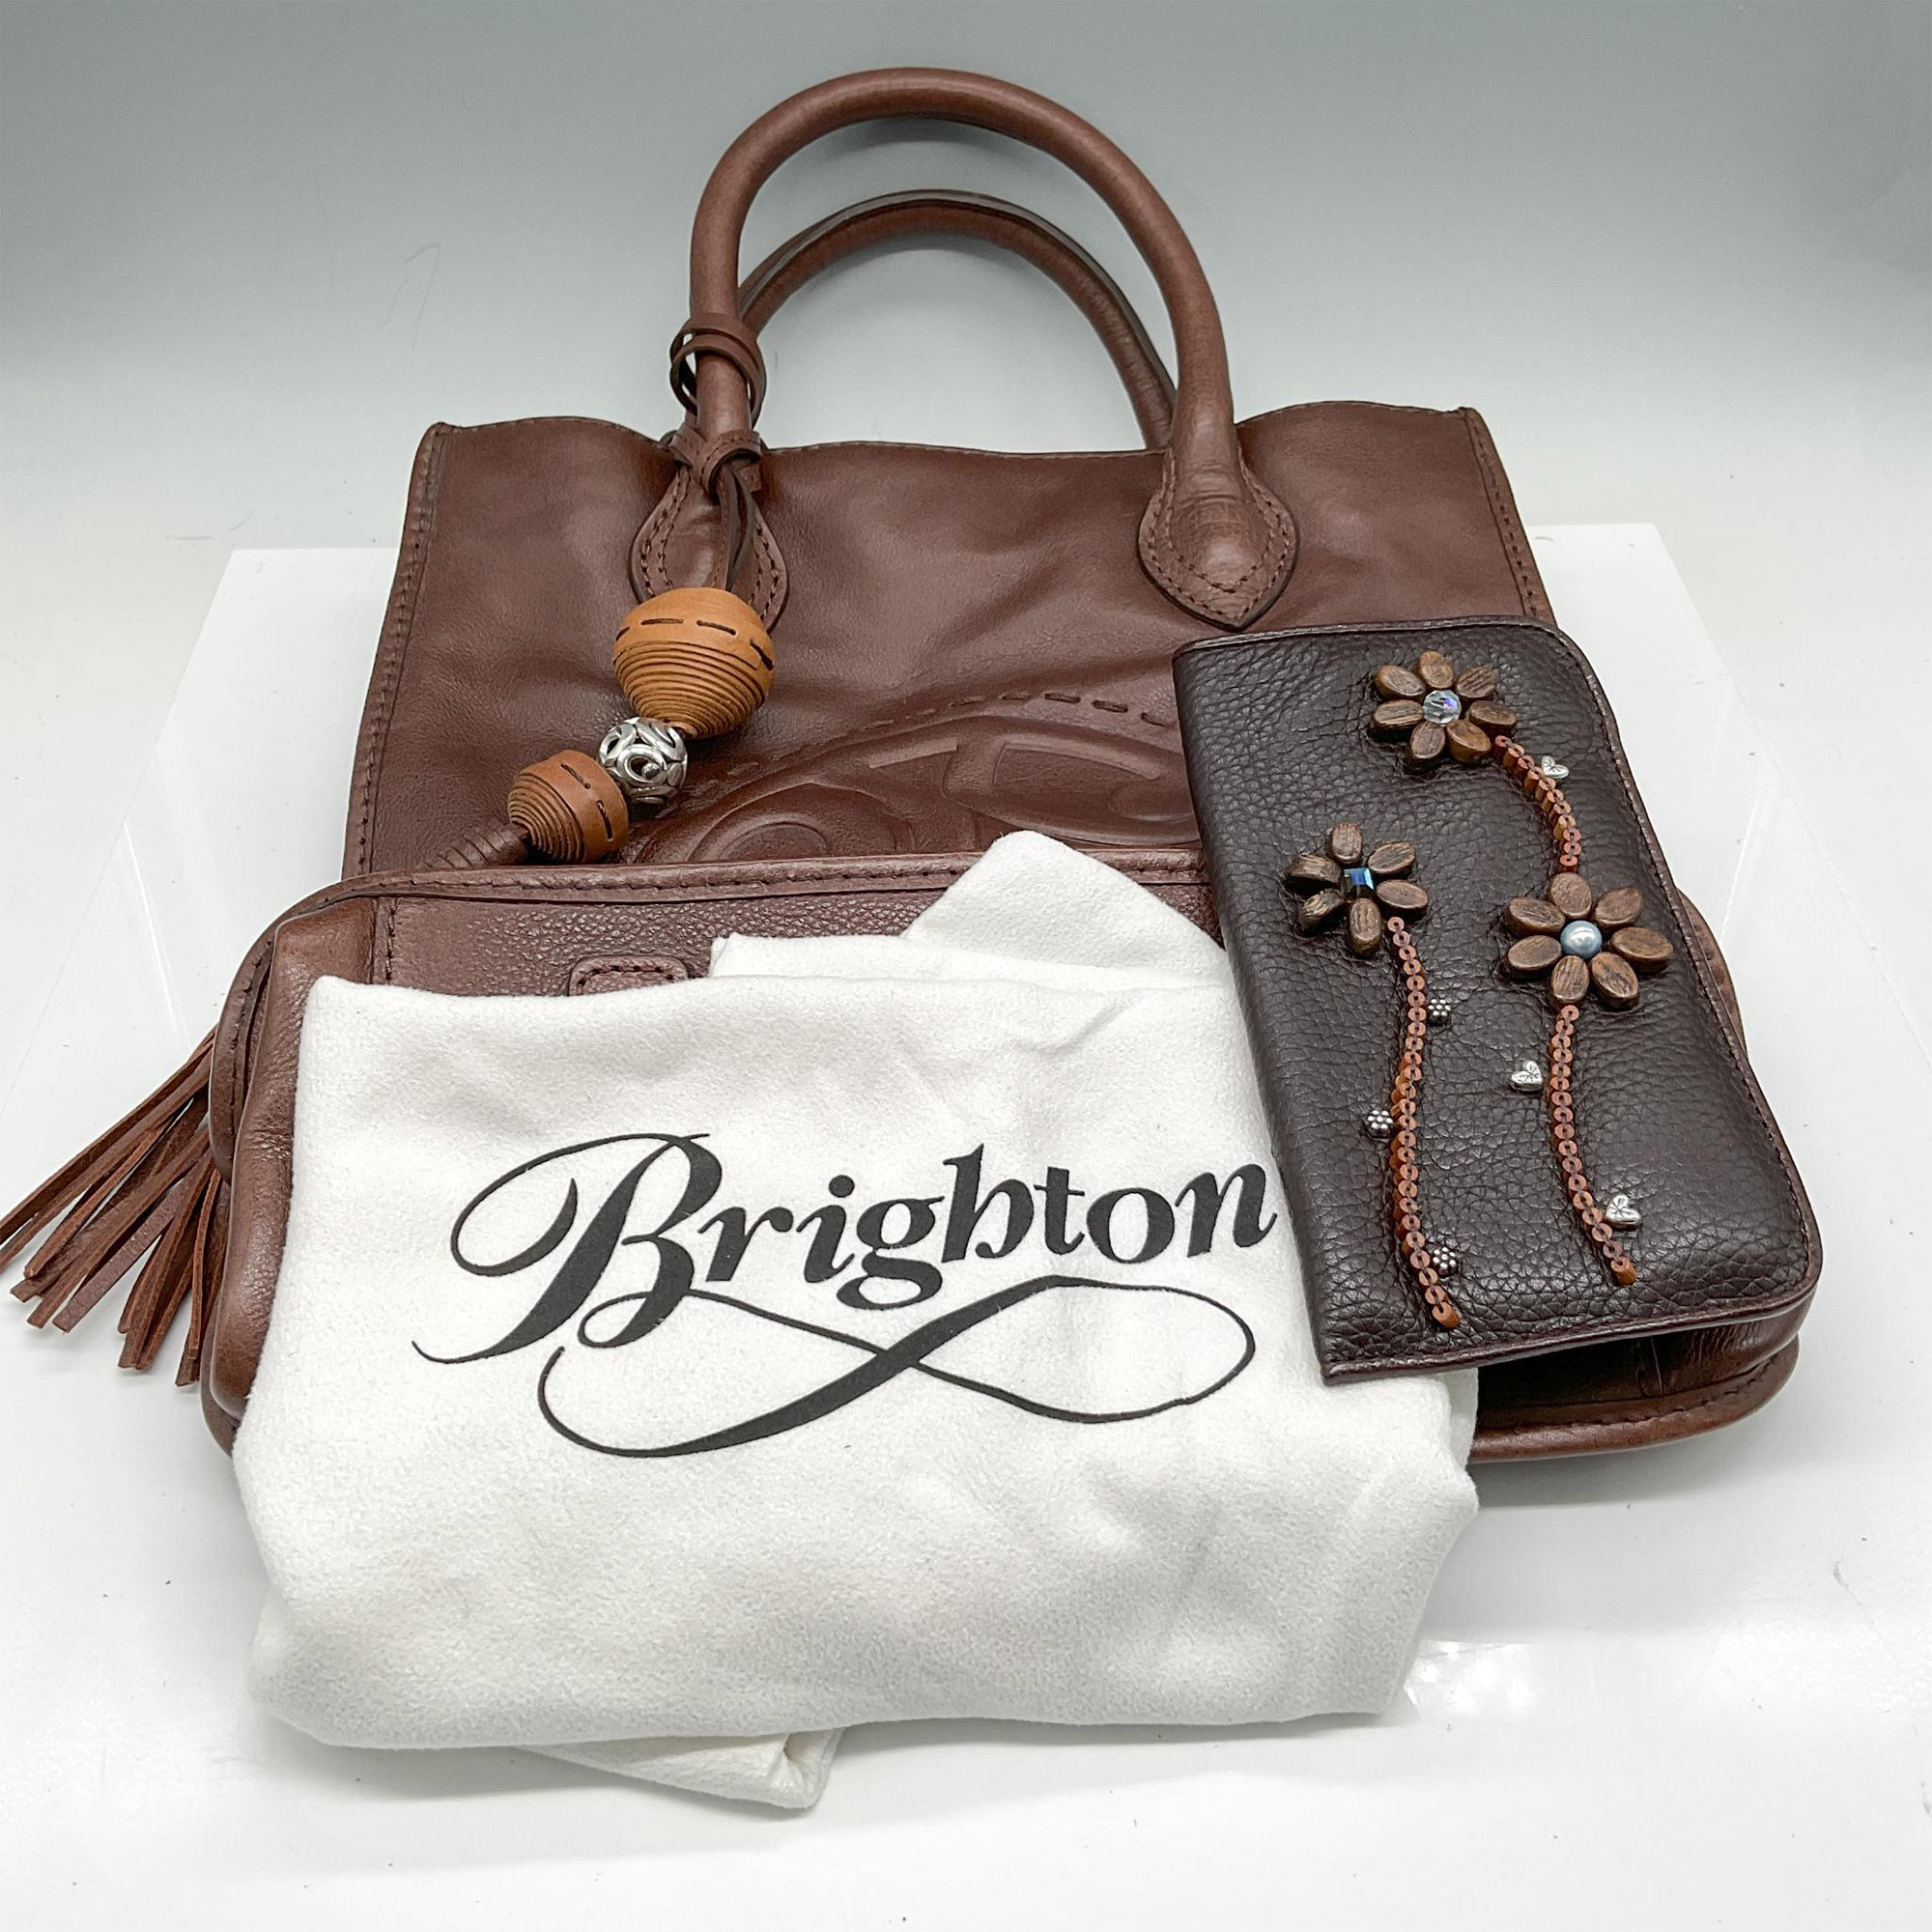 2pc Brighton Leather Tote Bag + Glass Case - Image 3 of 3